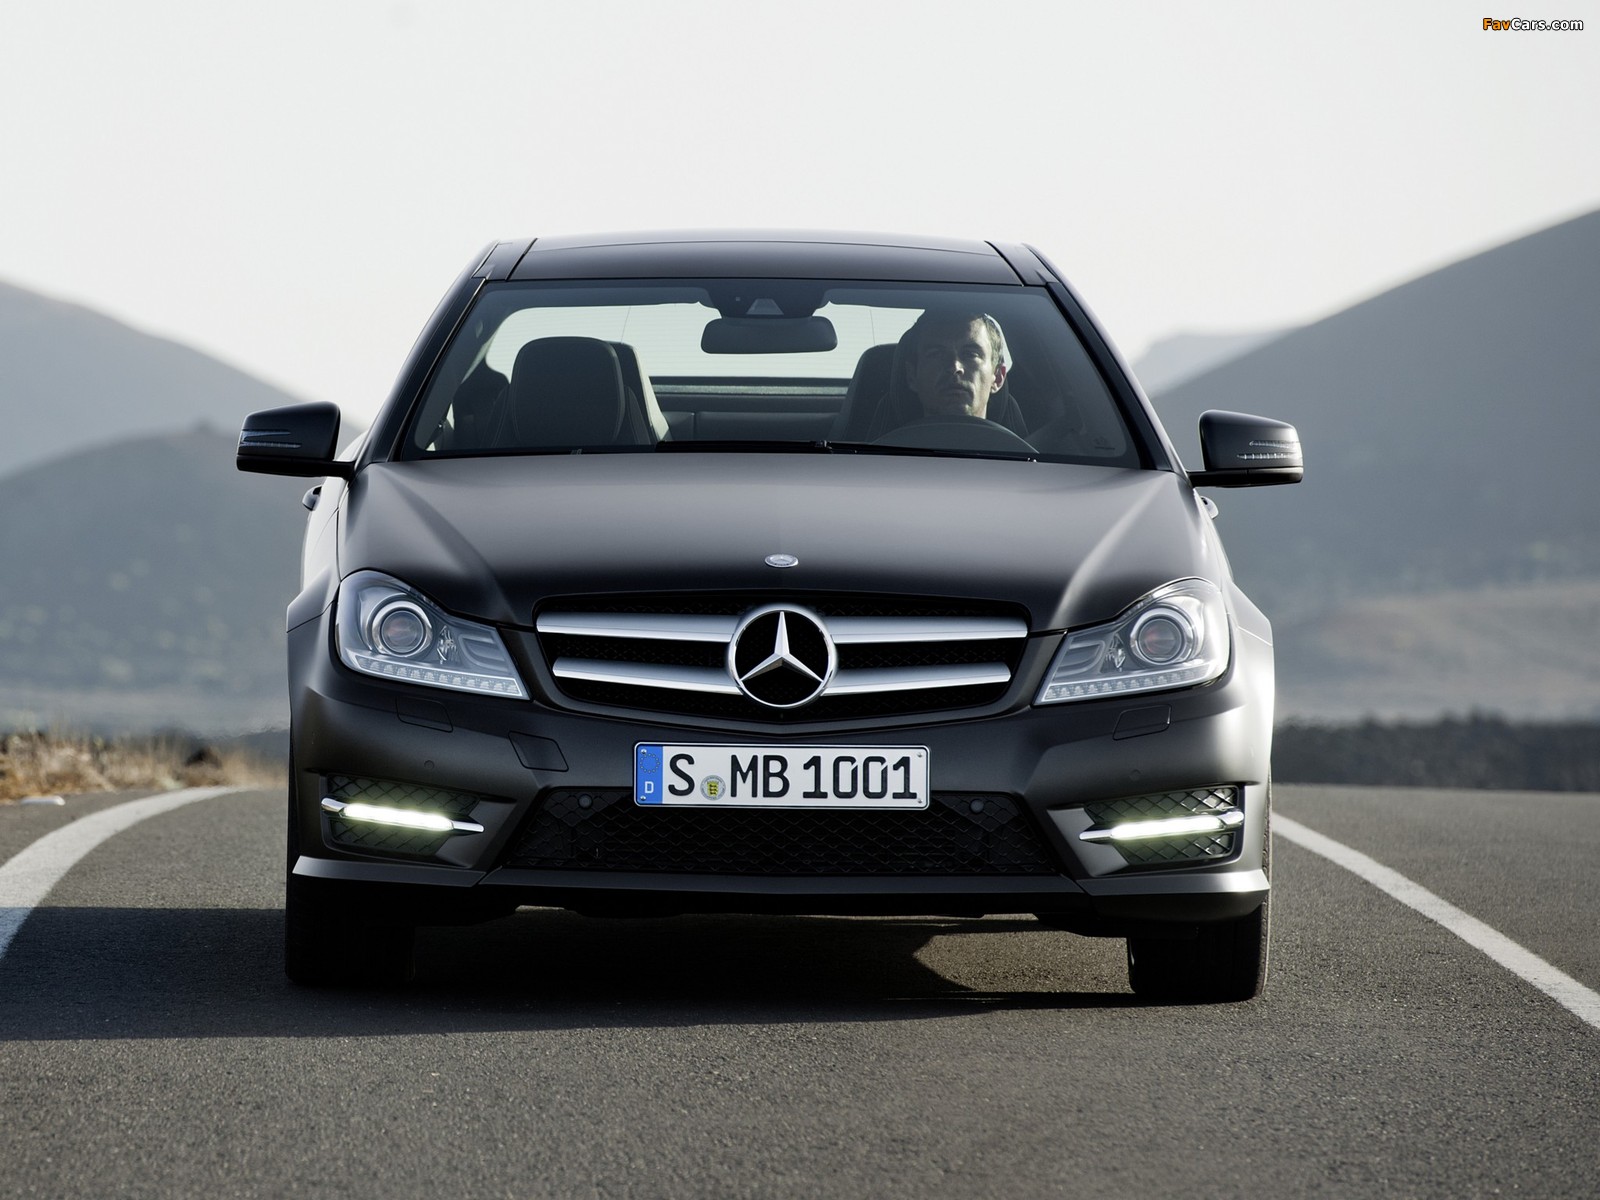 Mercedes-Benz C 250 CDI Coupe (C204) 2011 pictures (1600 x 1200)